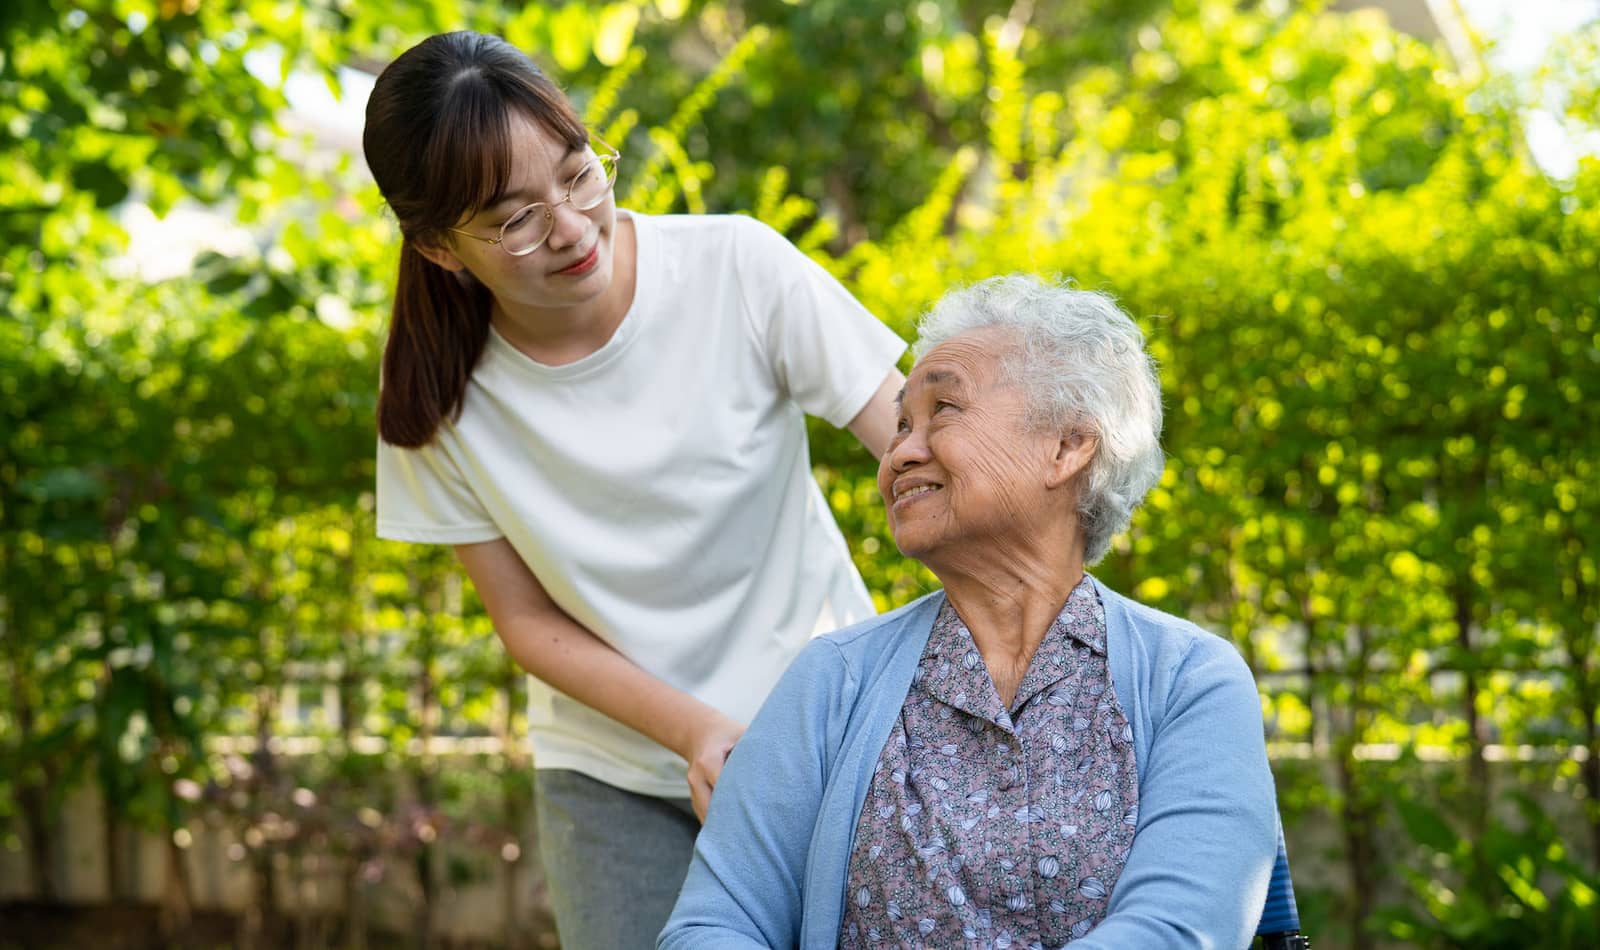 GALE enables the provision of caregiving services to seniors in vulnerable situations.